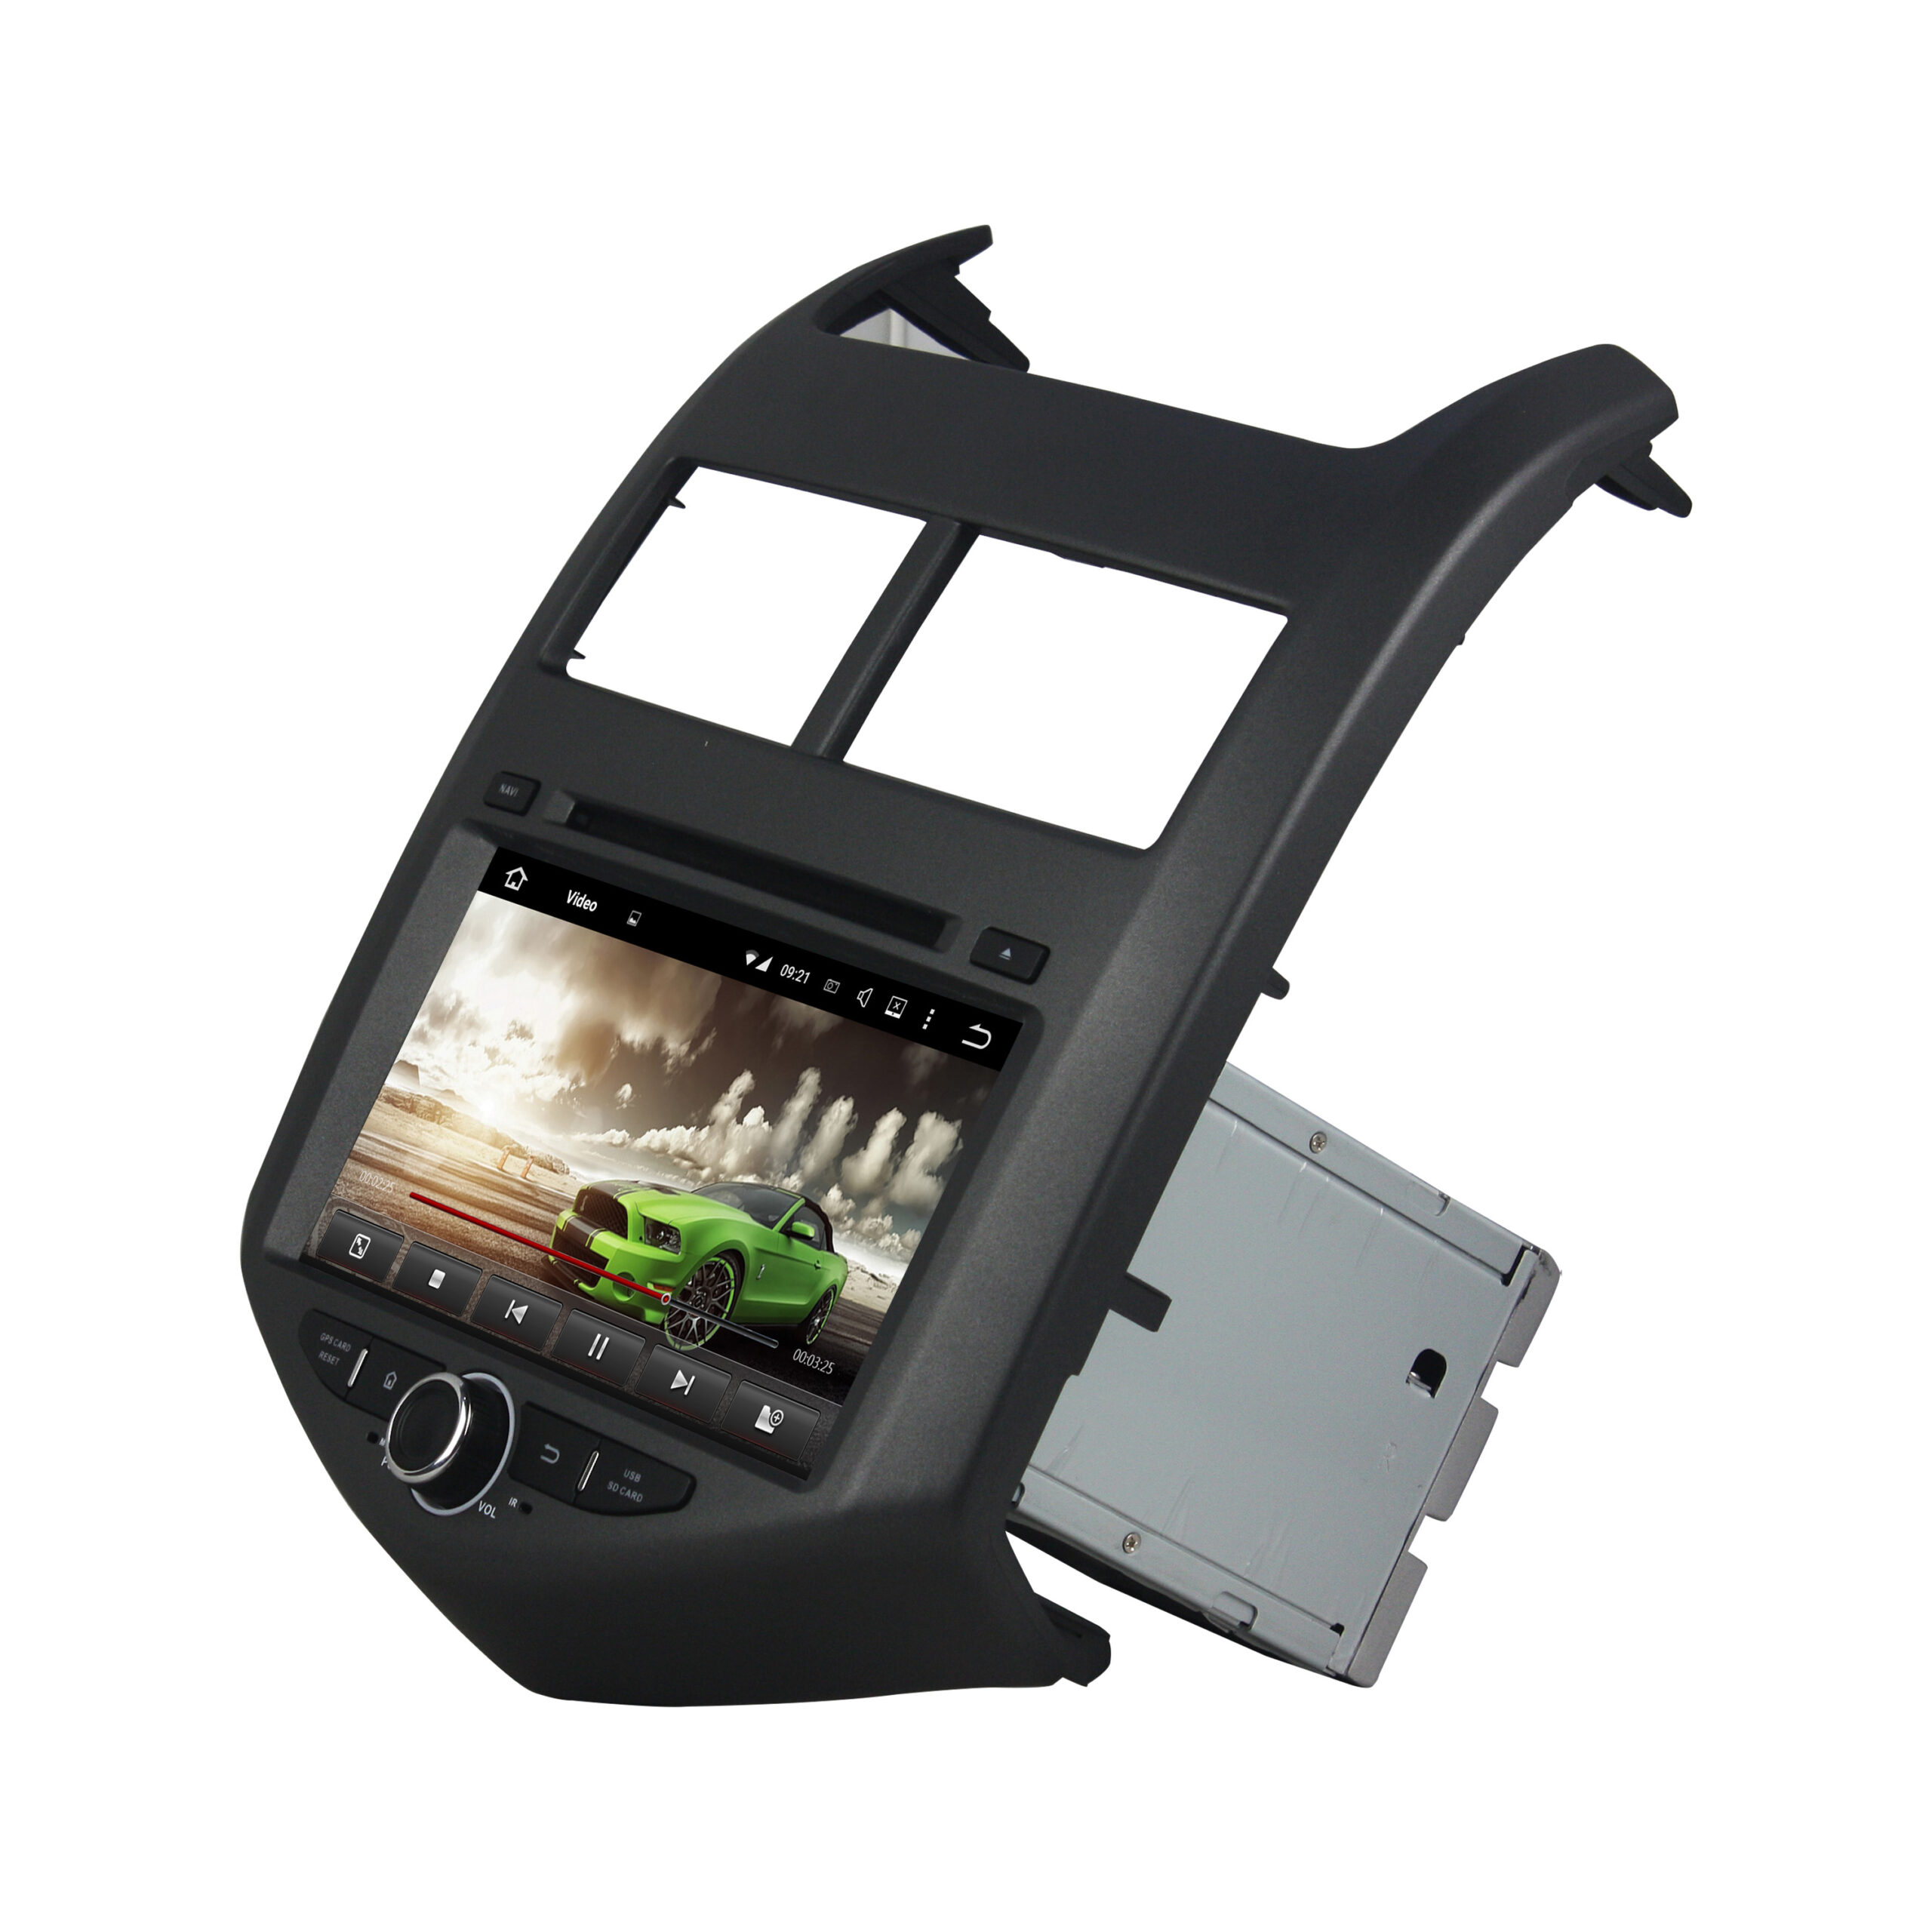 KD-9804 android touch screen car stereo navigation For AVEO 2011-2015